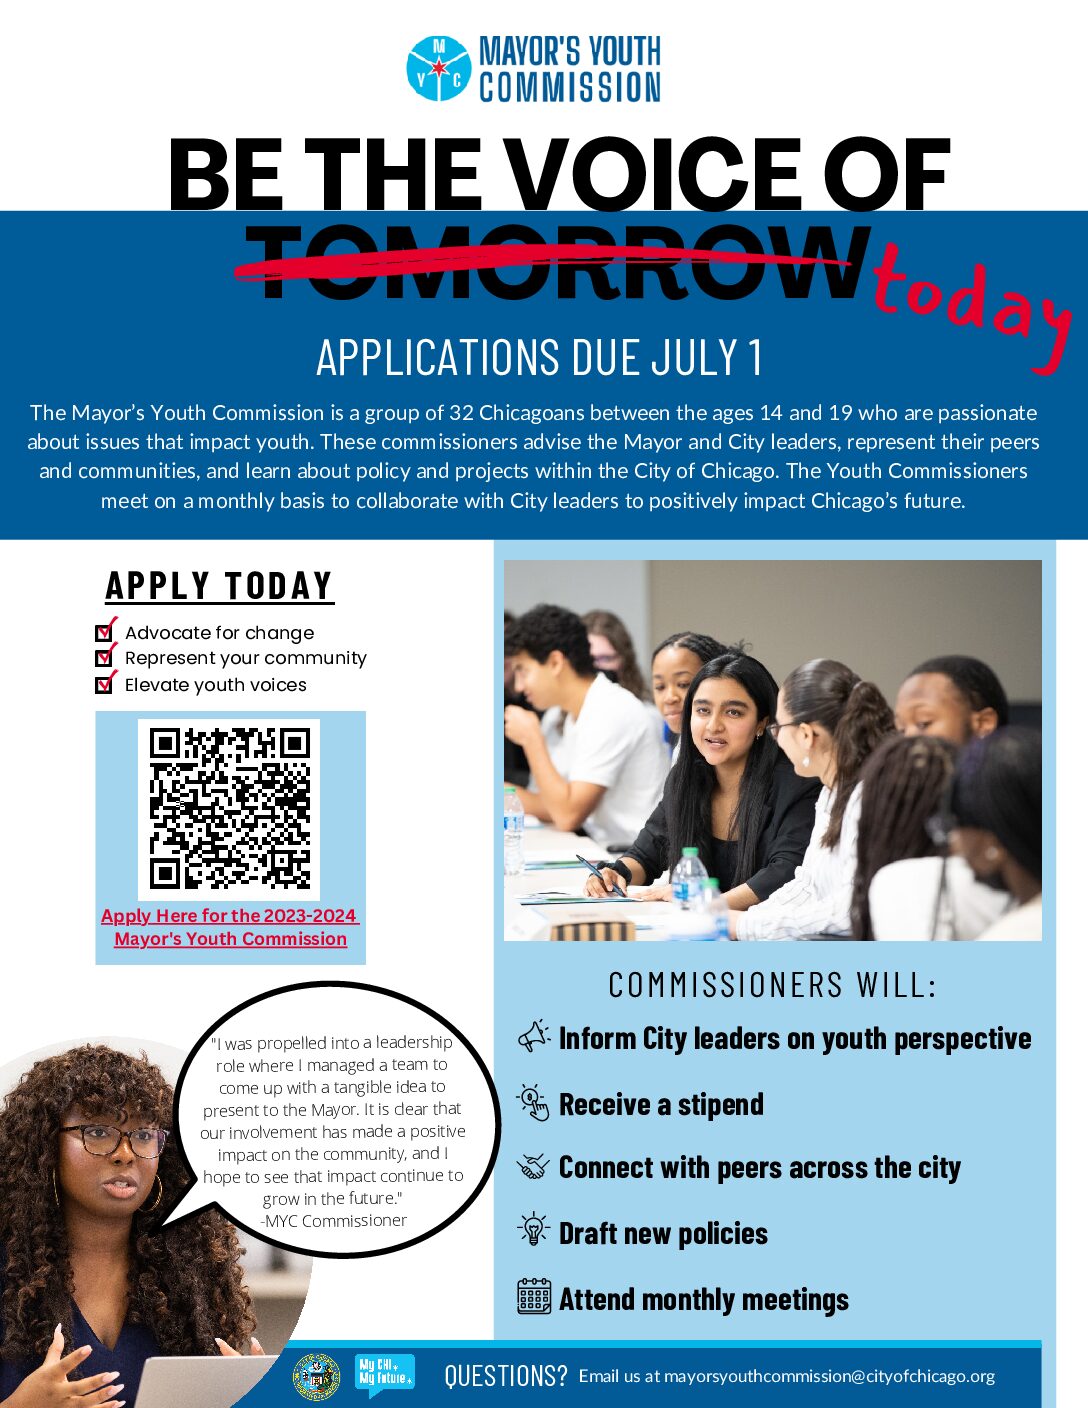 The Mayor’s Youth Commission application is now OPEN for the 2023-2024 cohort!